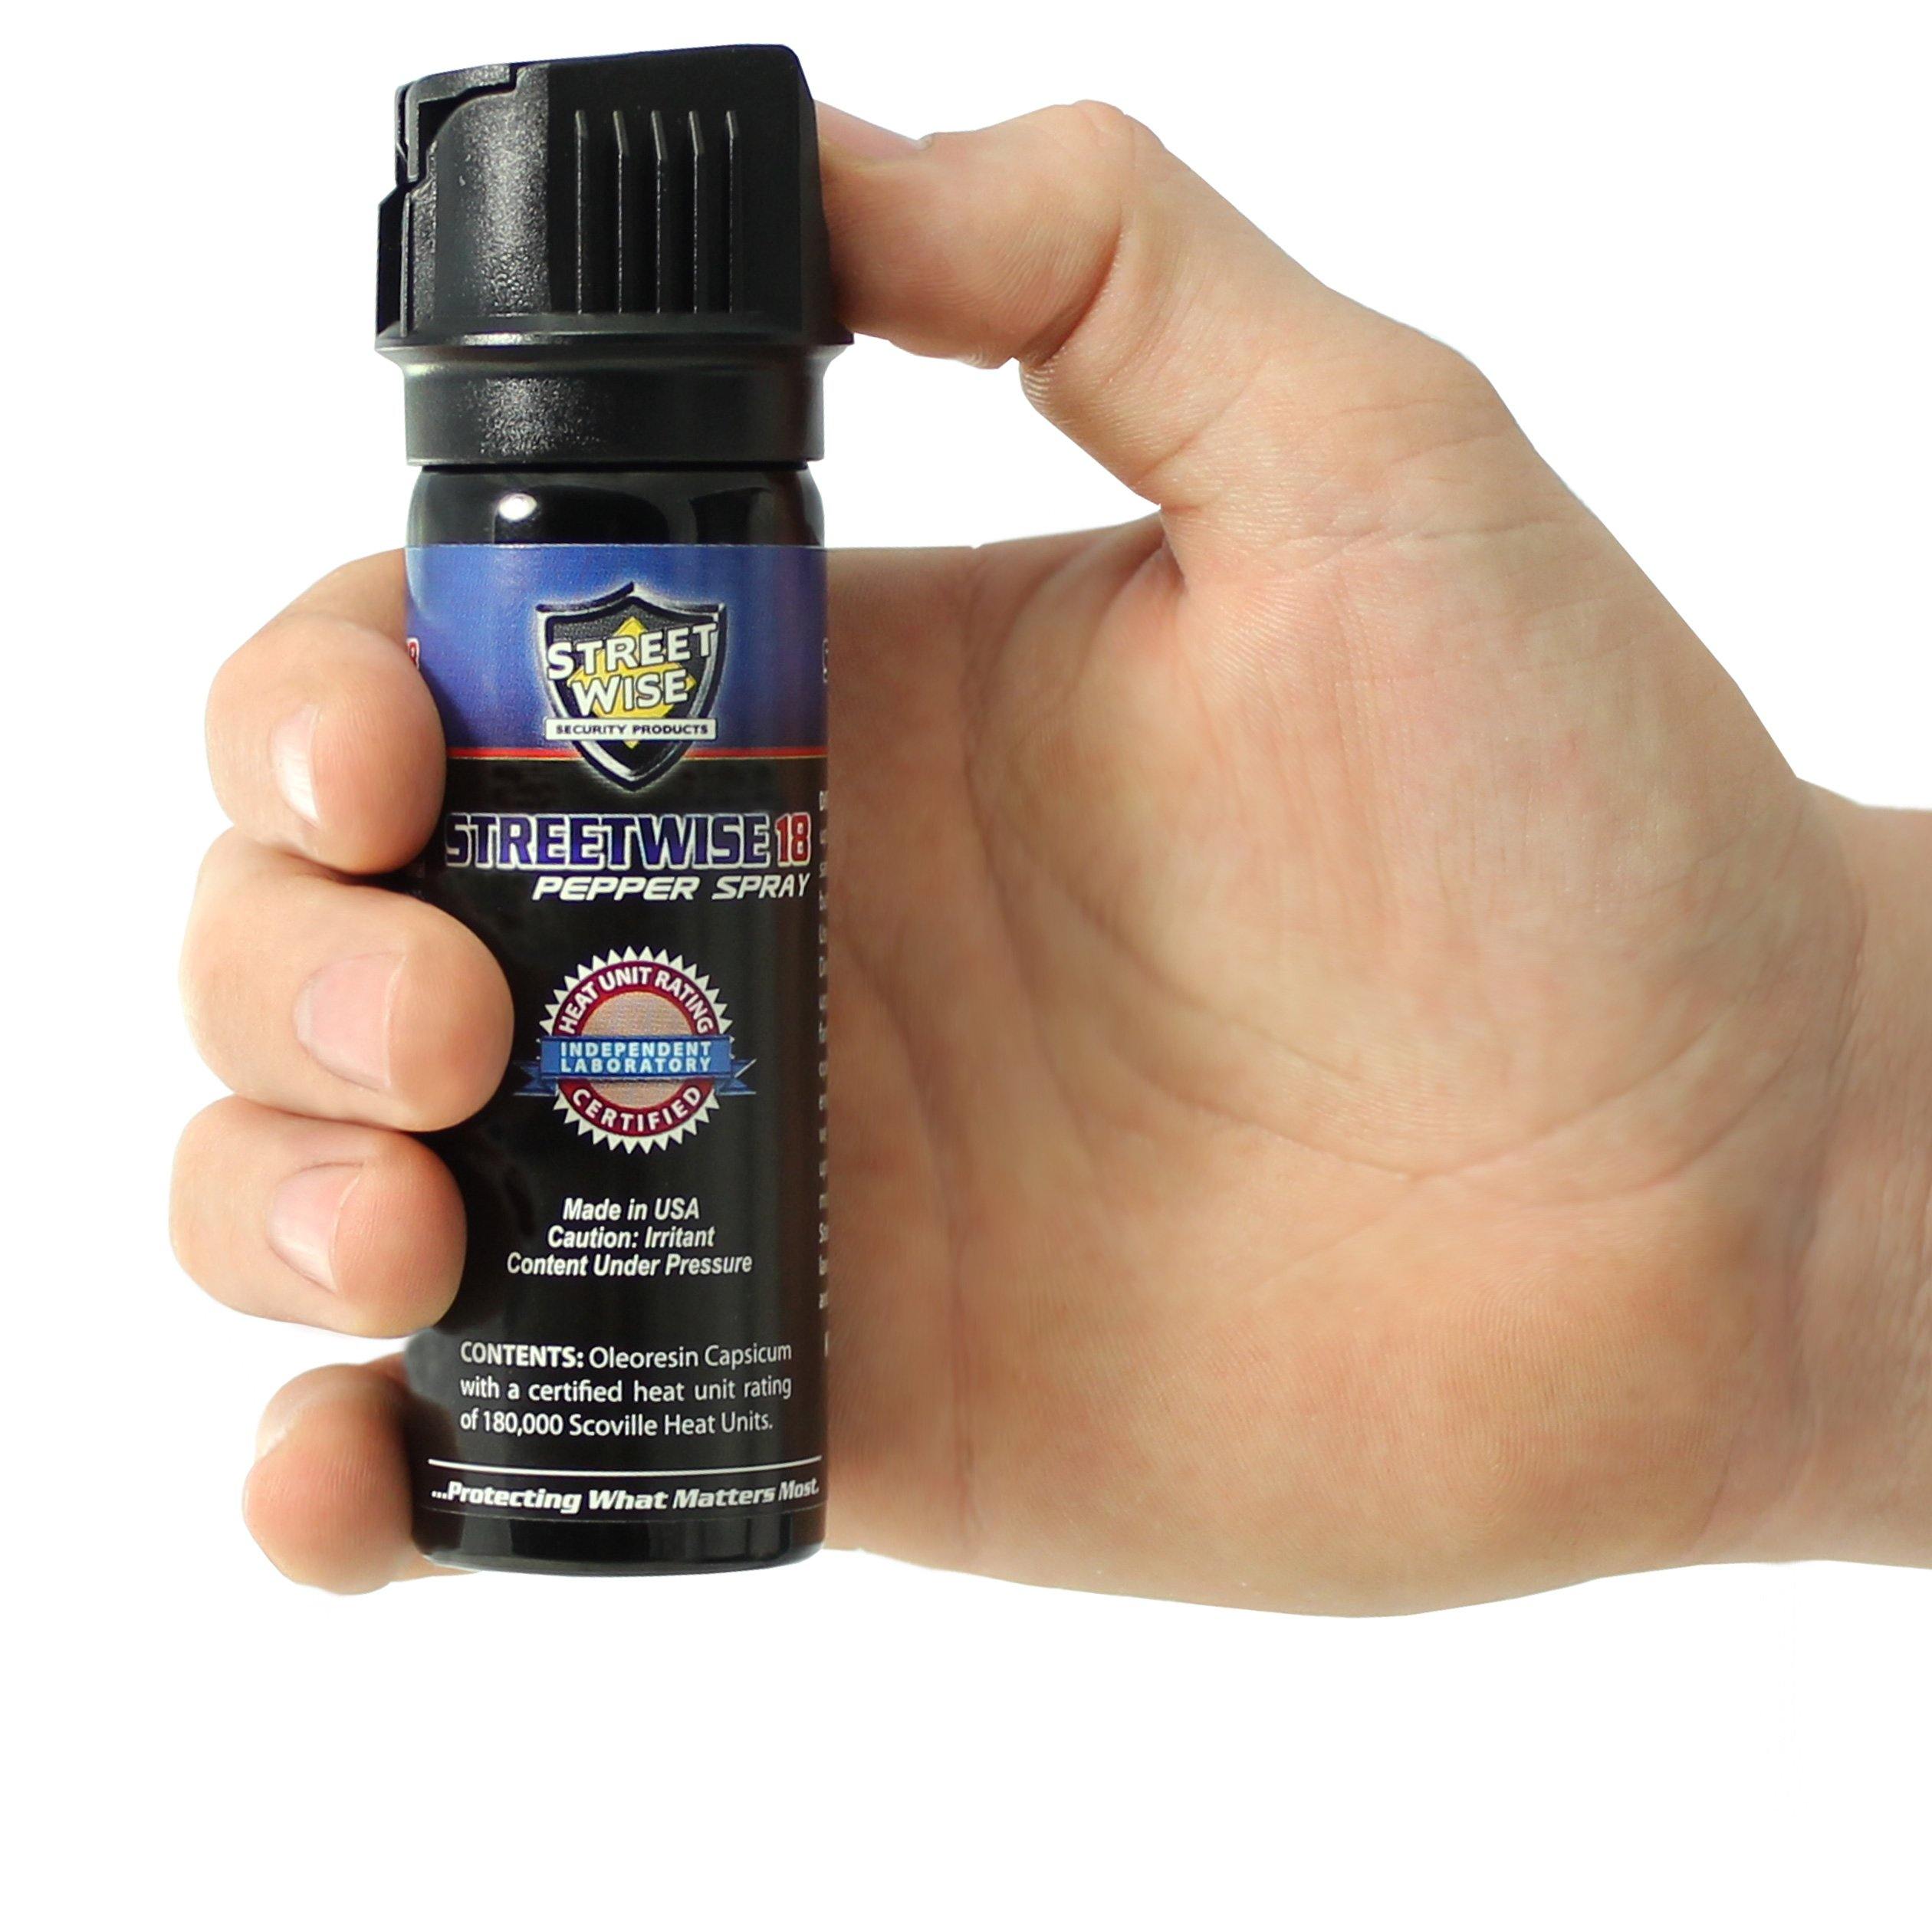 Streetwise 18 Pepper Spray 3 oz Flip-top Mace & Pepper Spray Shield Protection Products LLC.